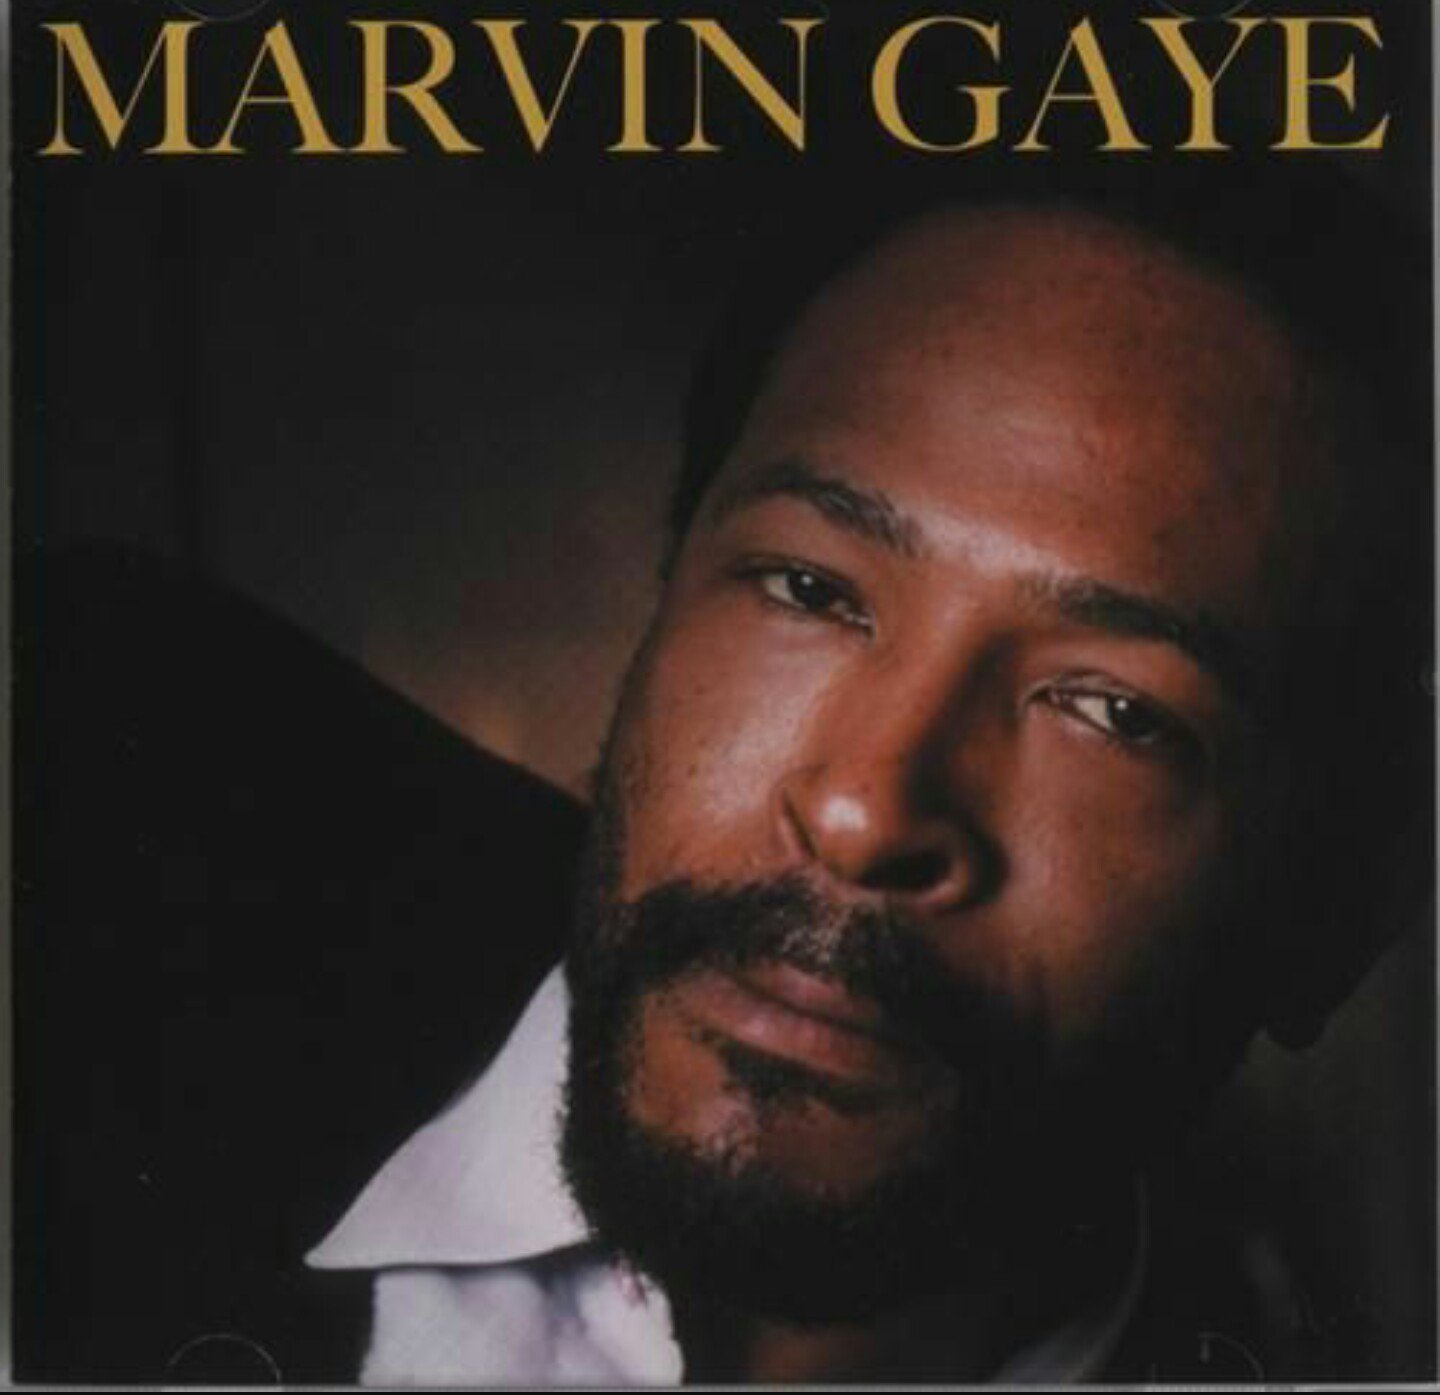 Happy birthday to you Marvin Gaye love you rip           